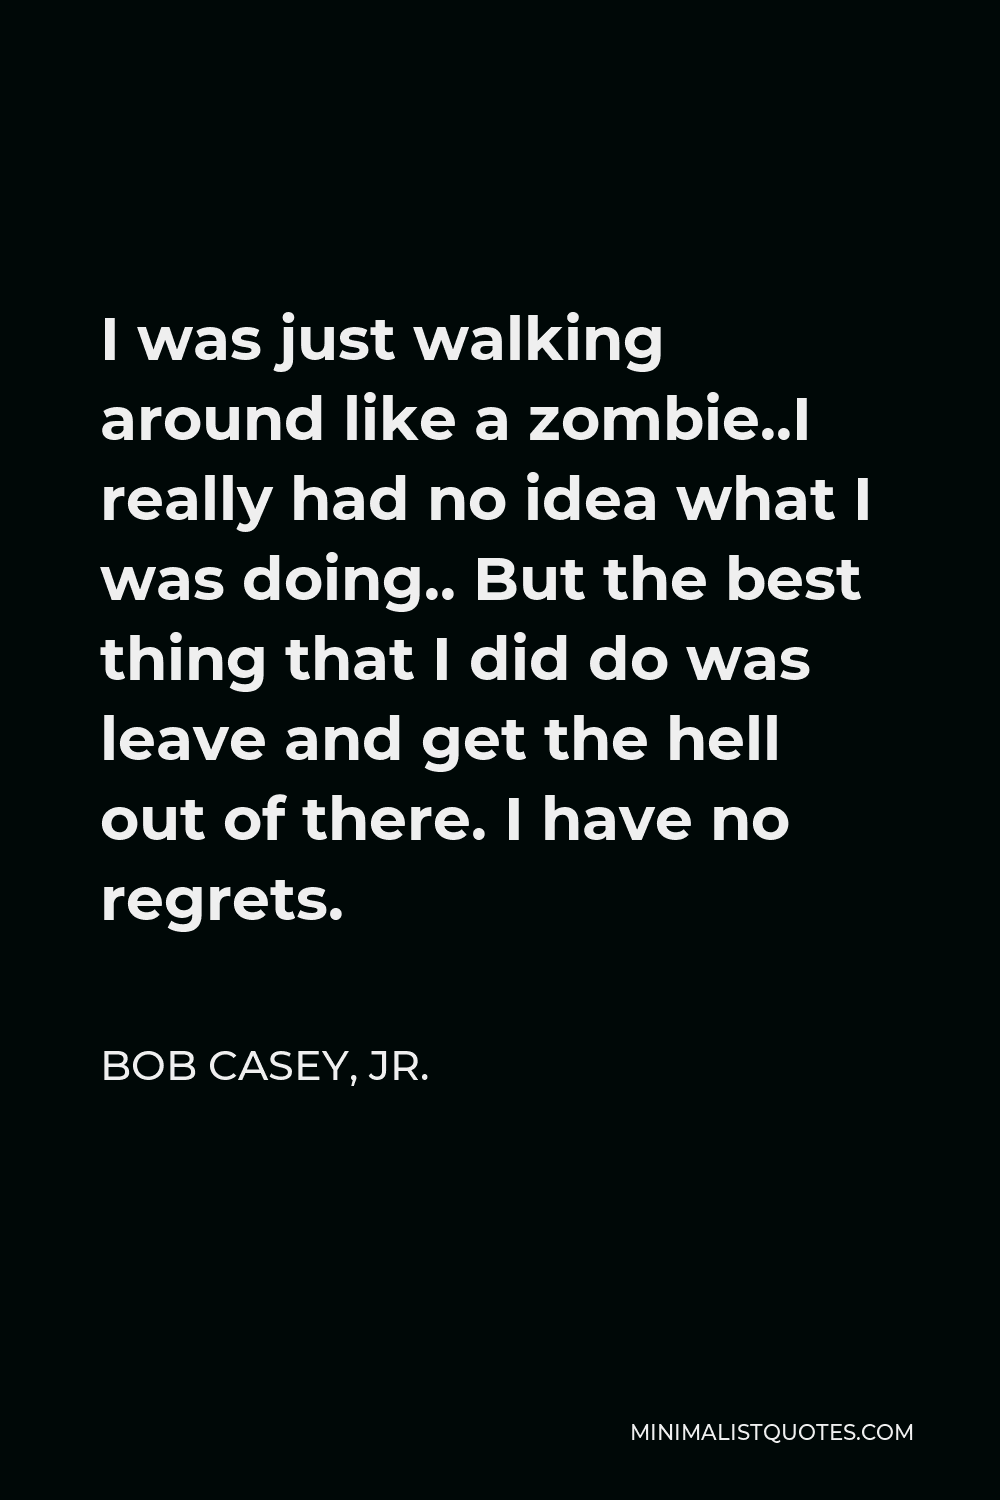 Bob Casey, Jr. Quote - I was just walking around like a zombie..I really had no idea what I was doing.. But the best thing that I did do was leave and get the hell out of there. I have no regrets.